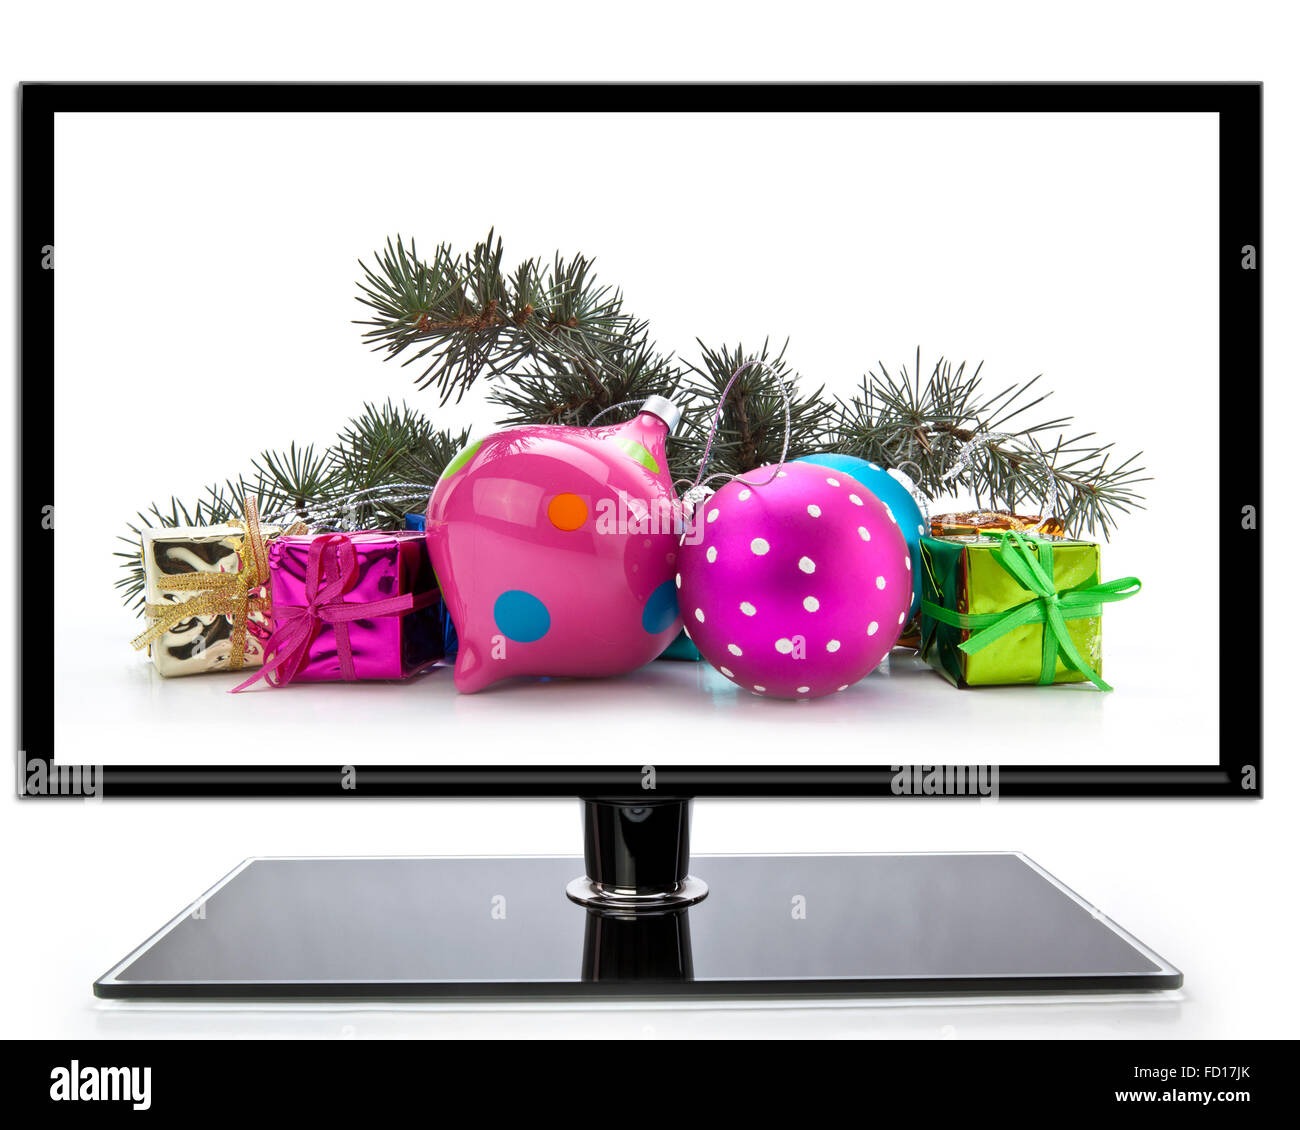 Flat screen TV with Christmas decoration on a white background Stock Photo